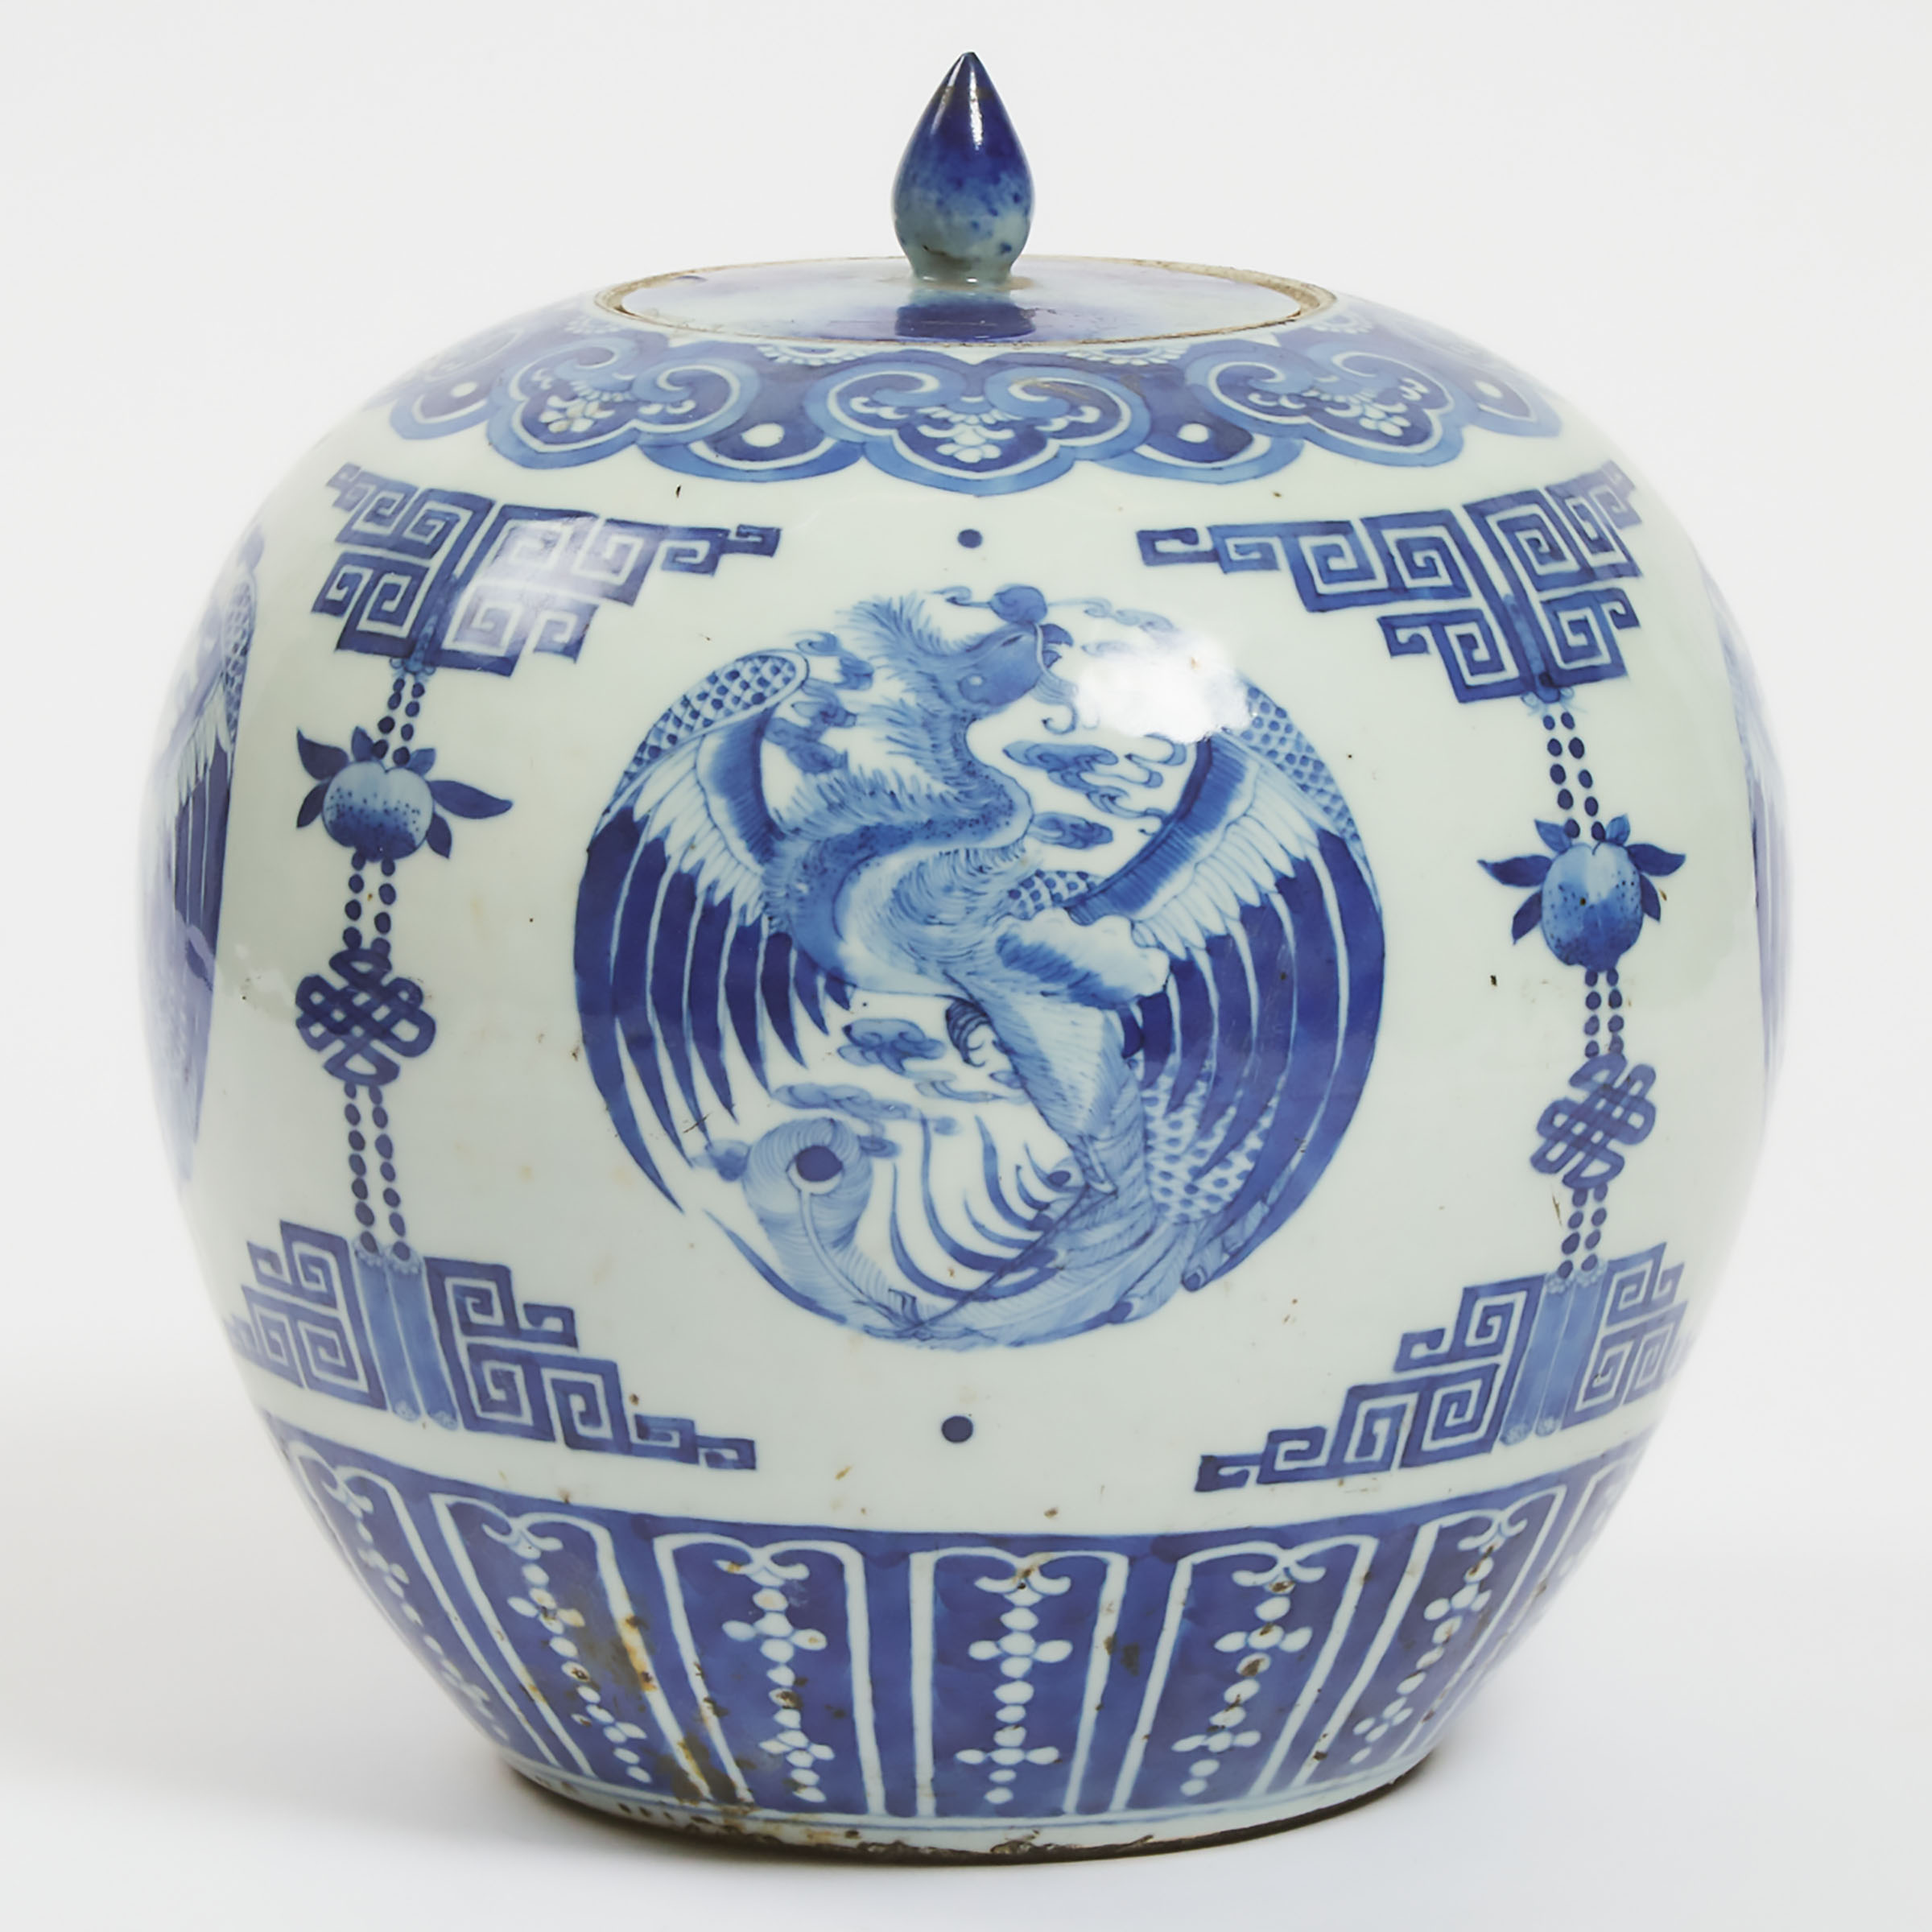 A Blue and White 'Phoenix' Ginger Jar and Cover, Early to Mid 20th Century